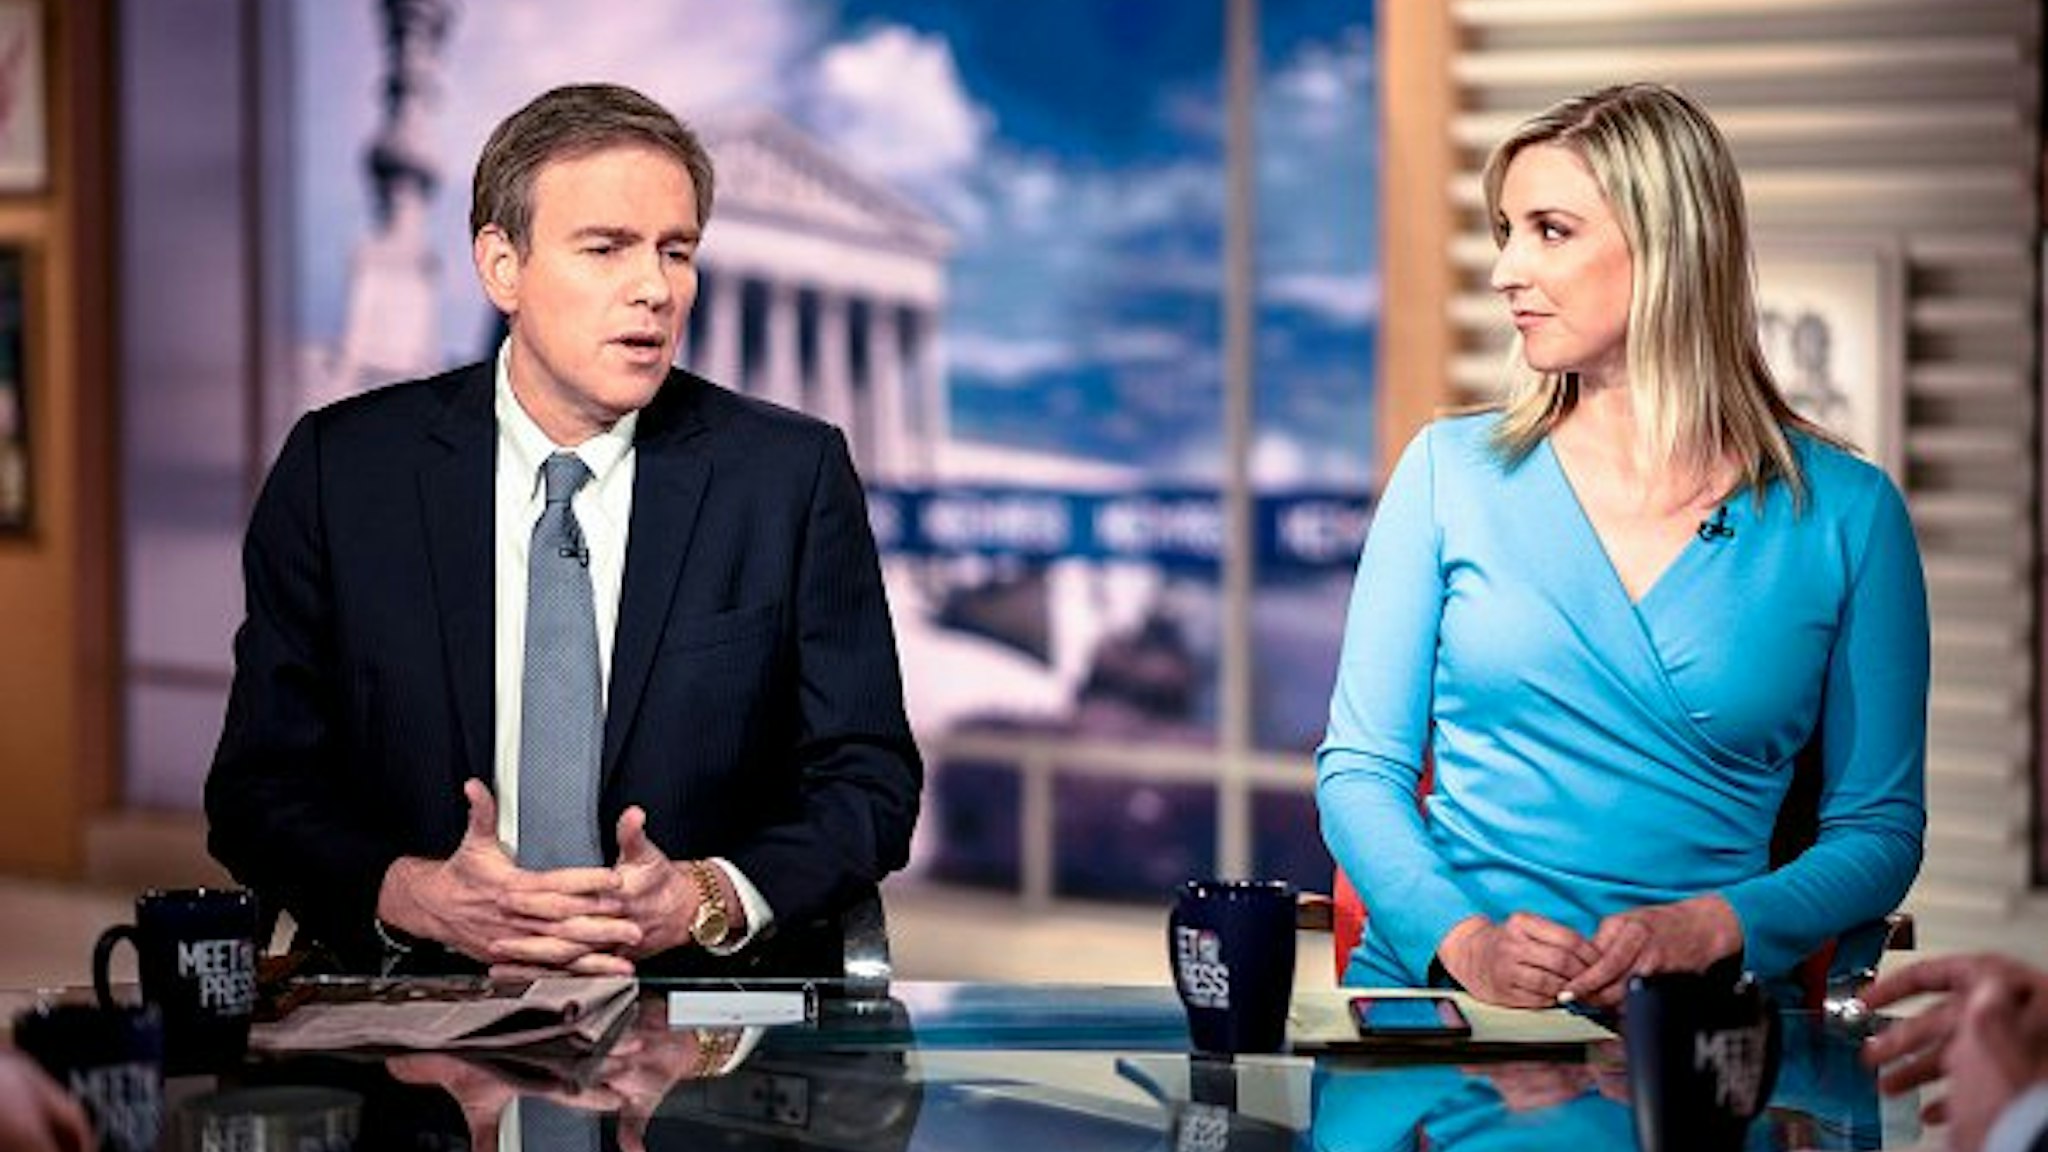 Bret Stephens, Columnist, The New York Times; MSNBC Contributor, and Carol Lee, NBC News National Political Reporter appear on "Meet the Press" in Washington, D.C., Sunday, June 17, 2018.